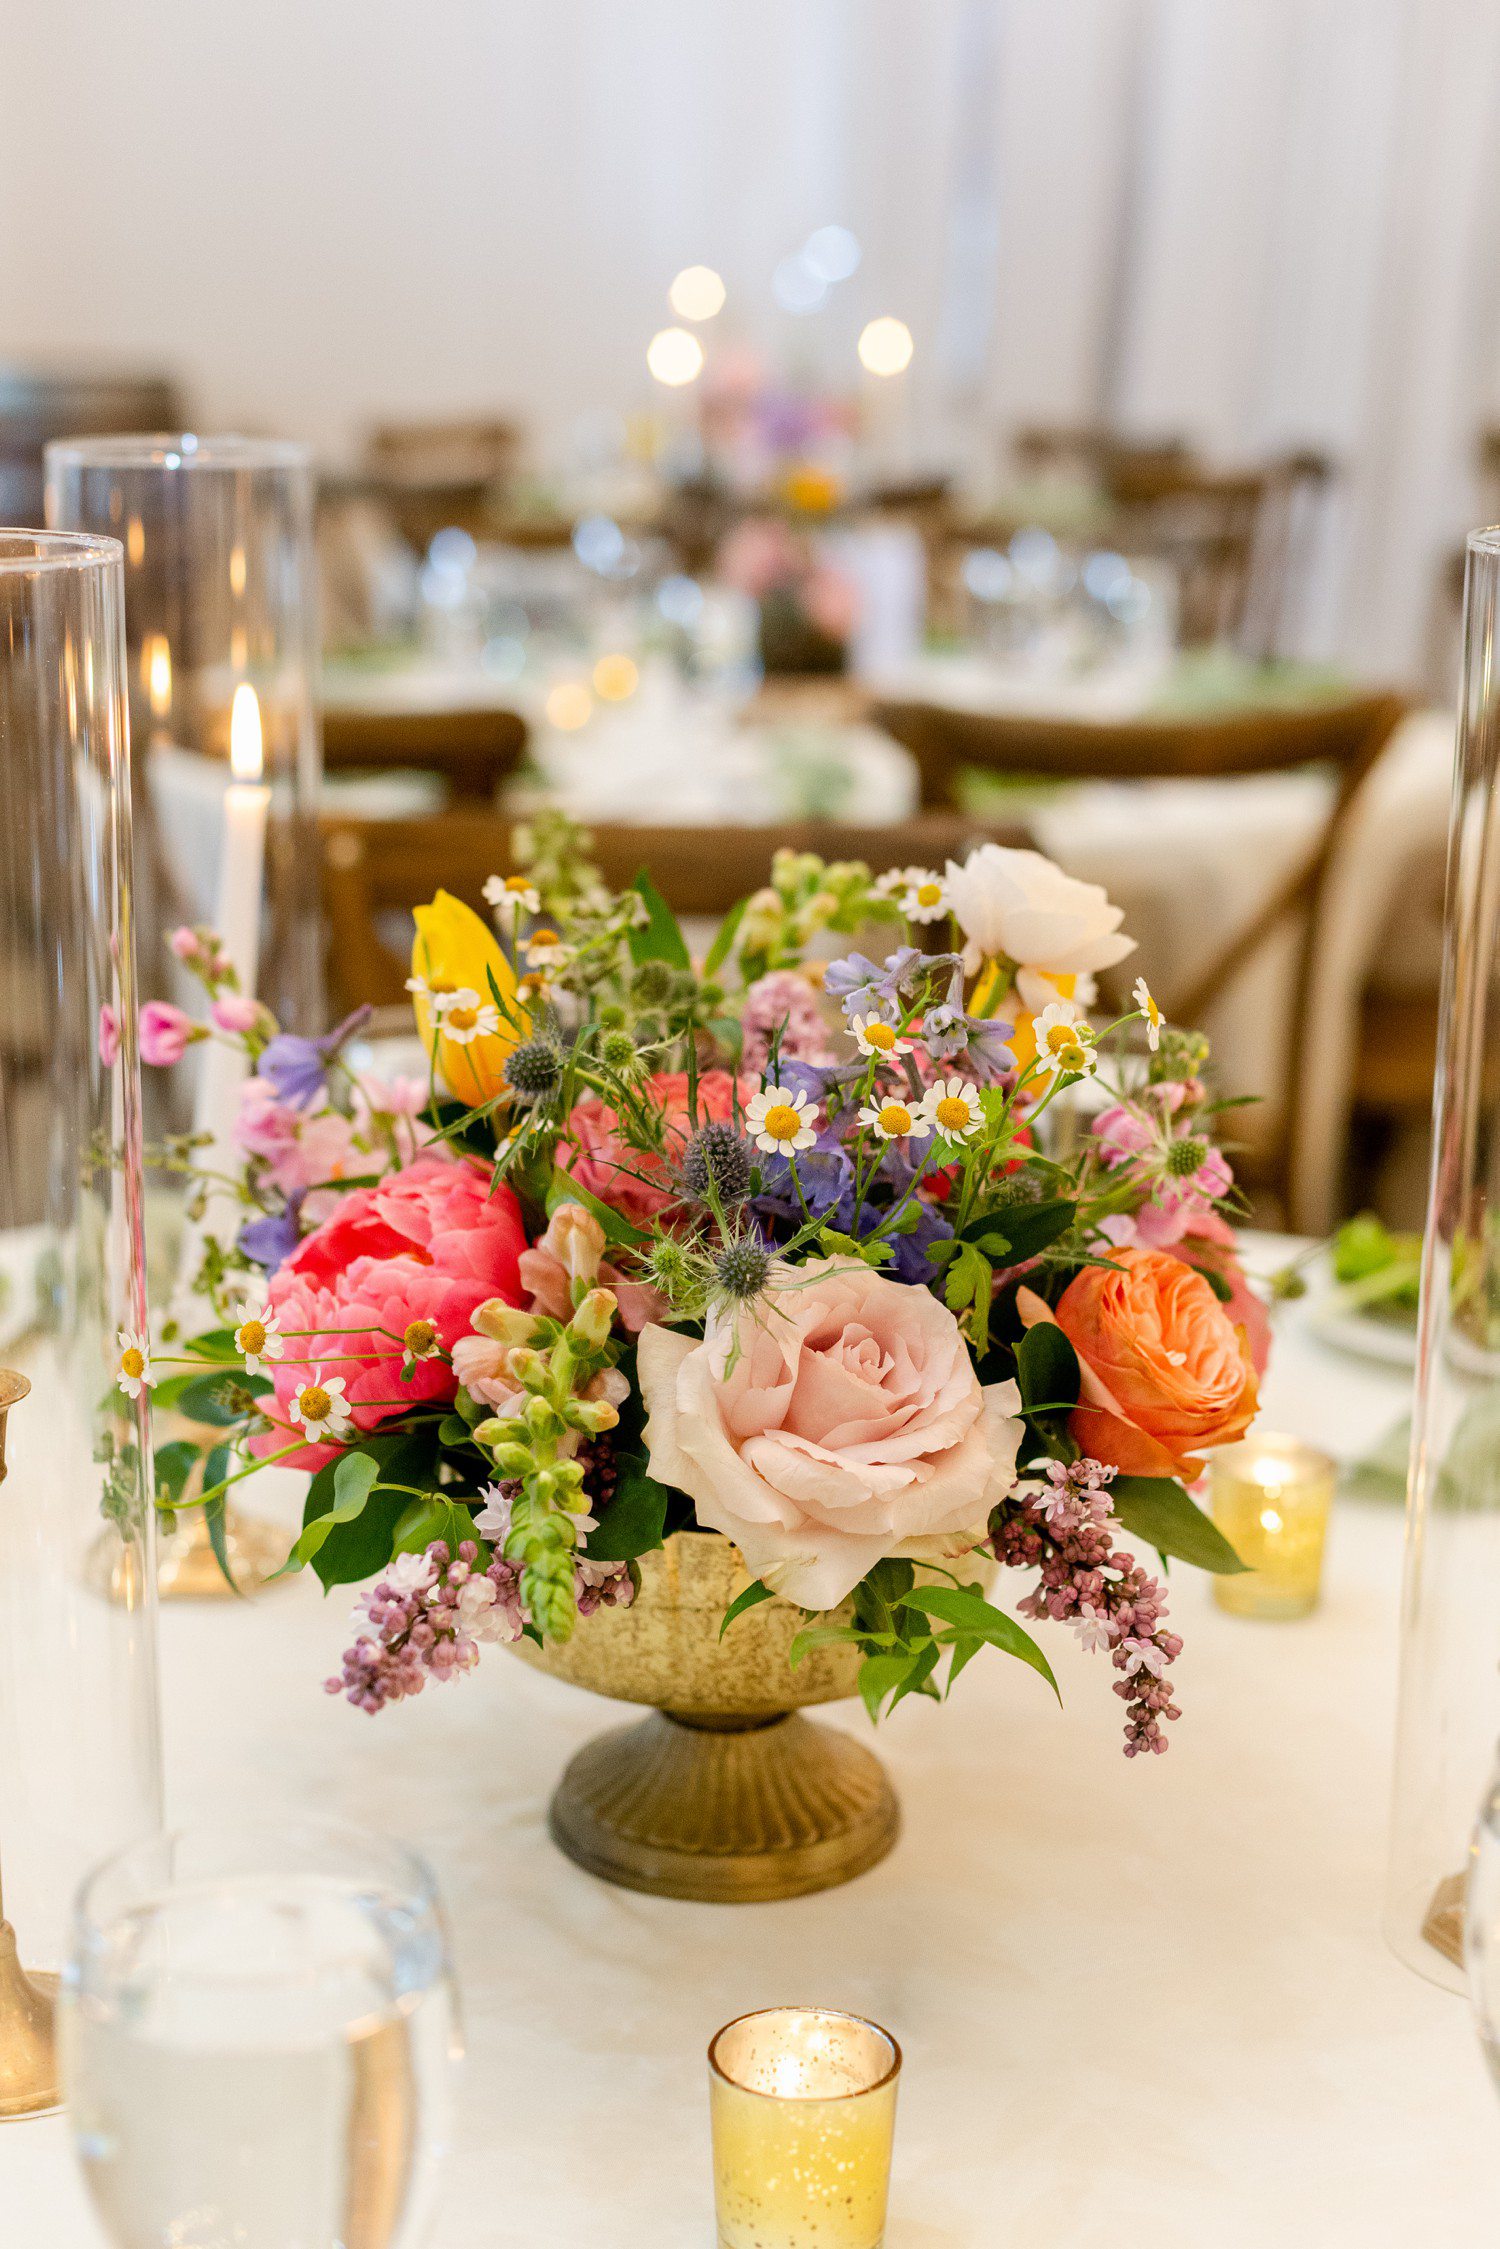 Colorful wedding table bouquets at Sendera Springs.